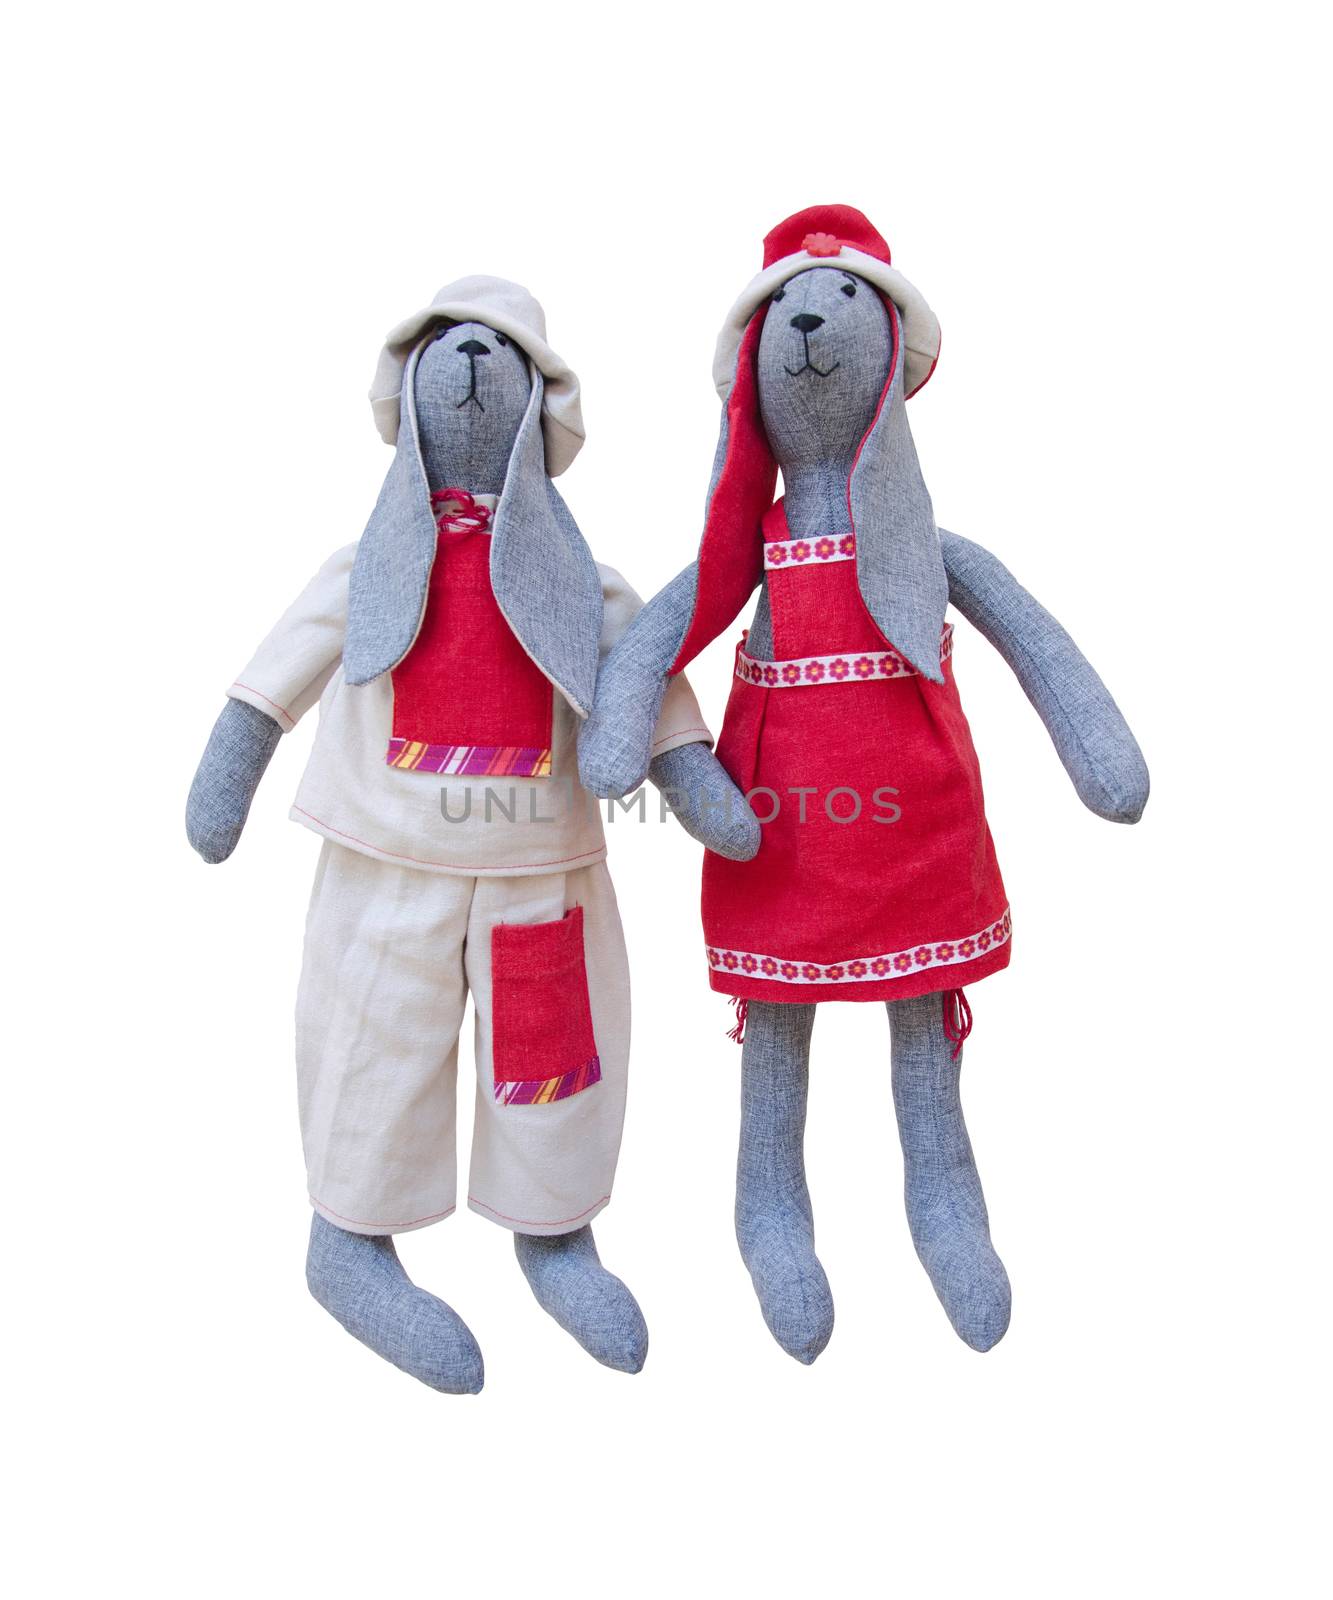 Isolated handmade dolls bunny family in homespun clothing by pt-home